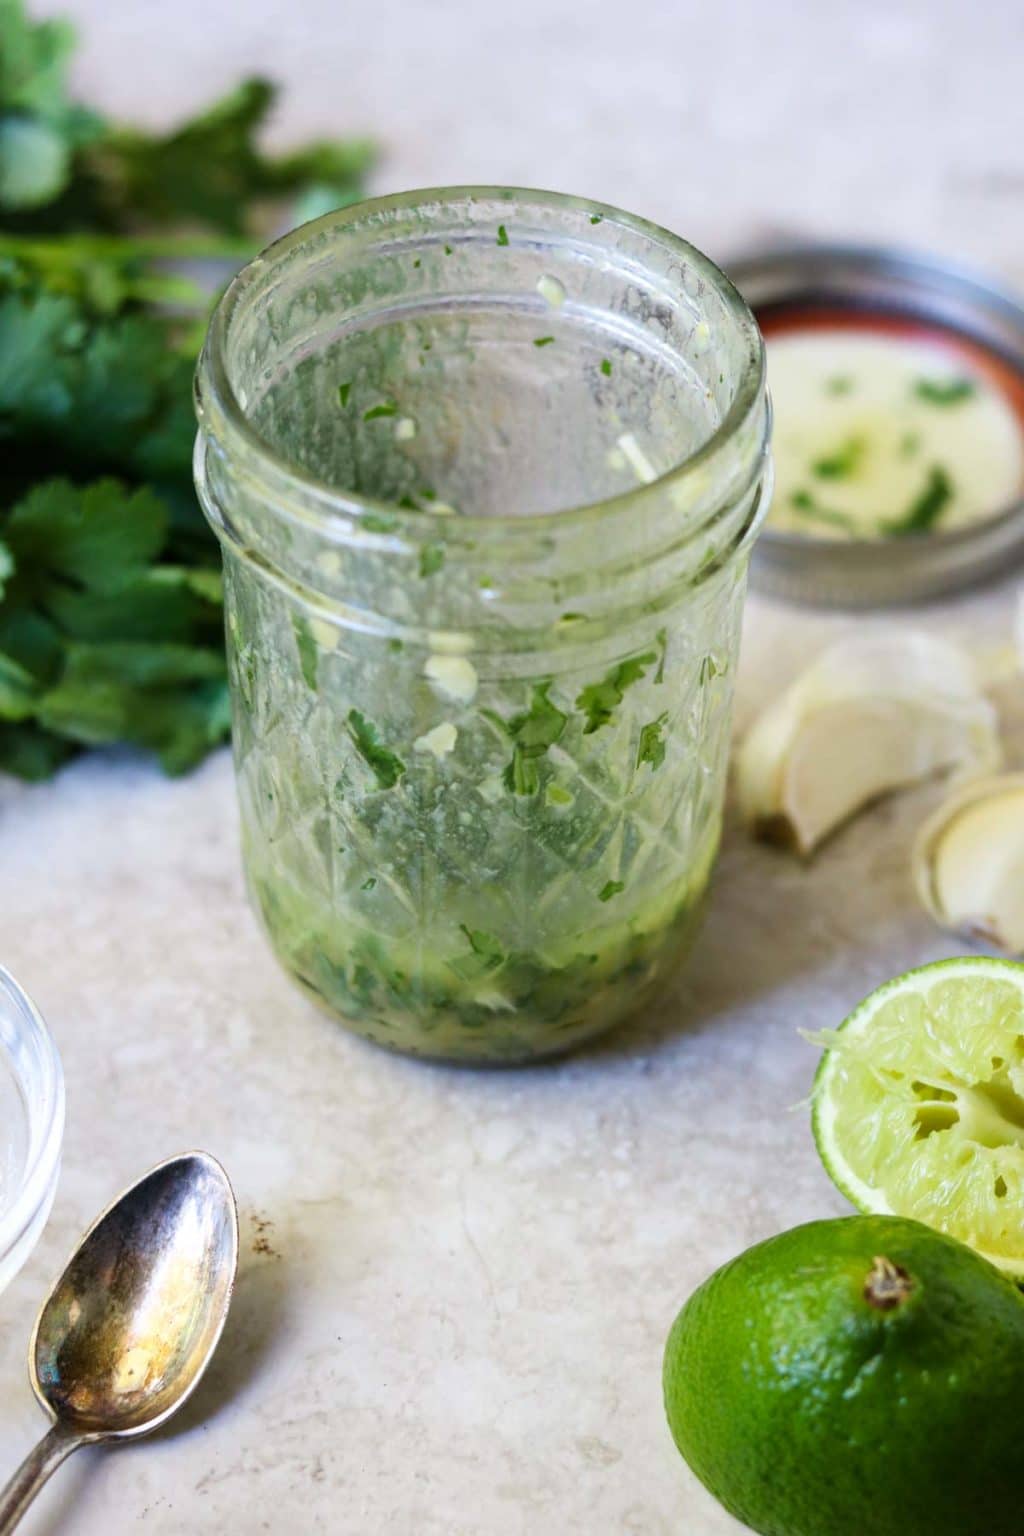 Cilantro Lime Vinaigrette in a mason jar with cilantro, garlic, and squeezed limes on the counter